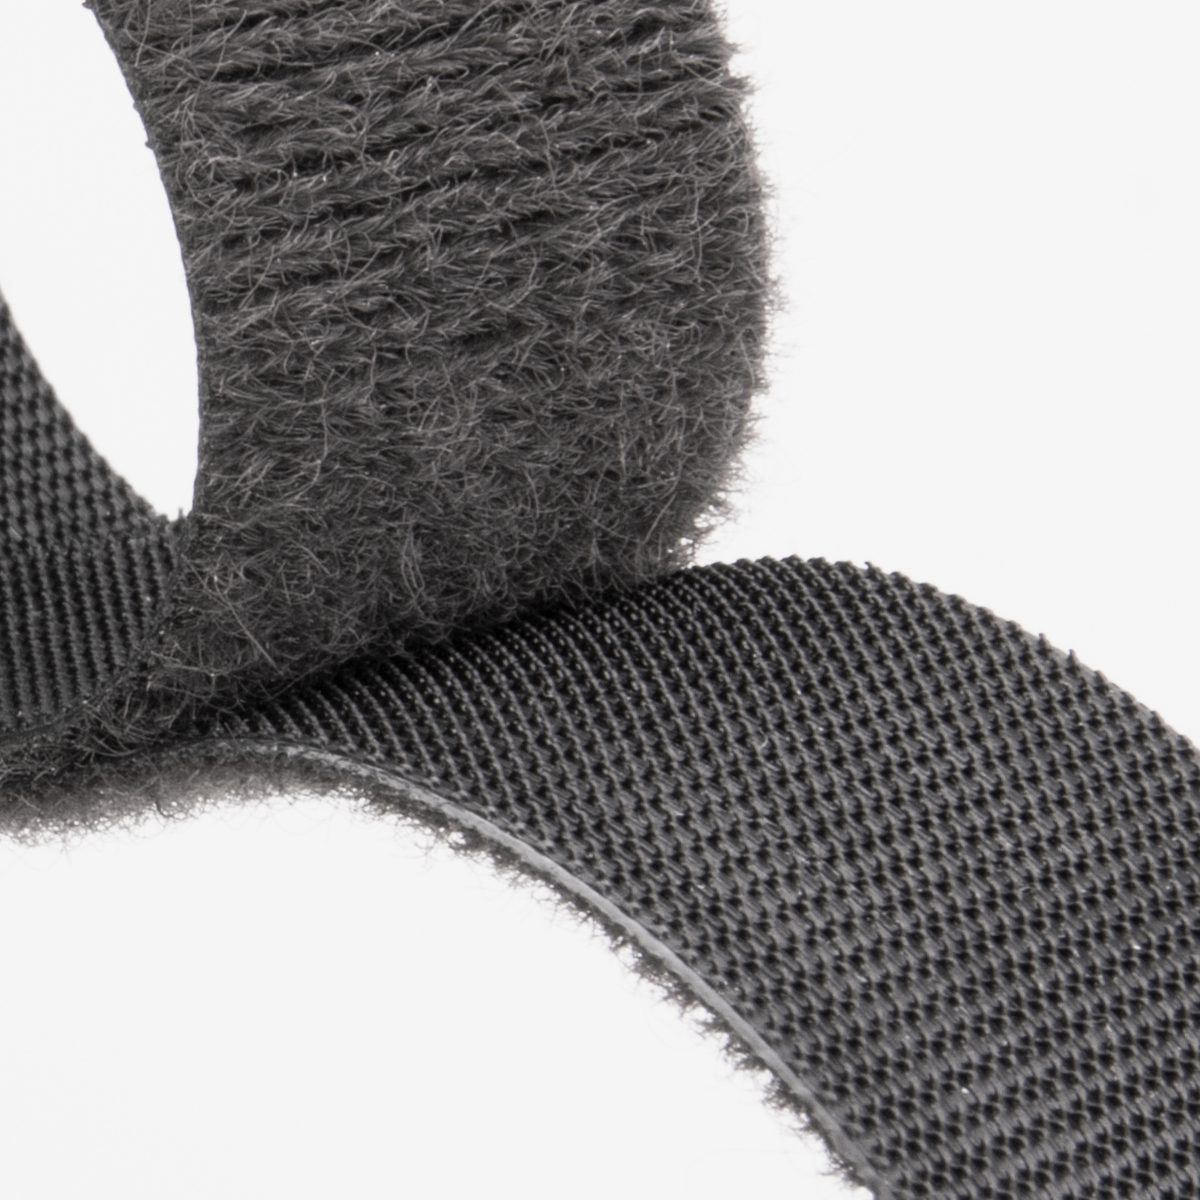 VELCRO Hook and loop ONE-WRAP® double sided Strapping  5 metre x 13mm in black